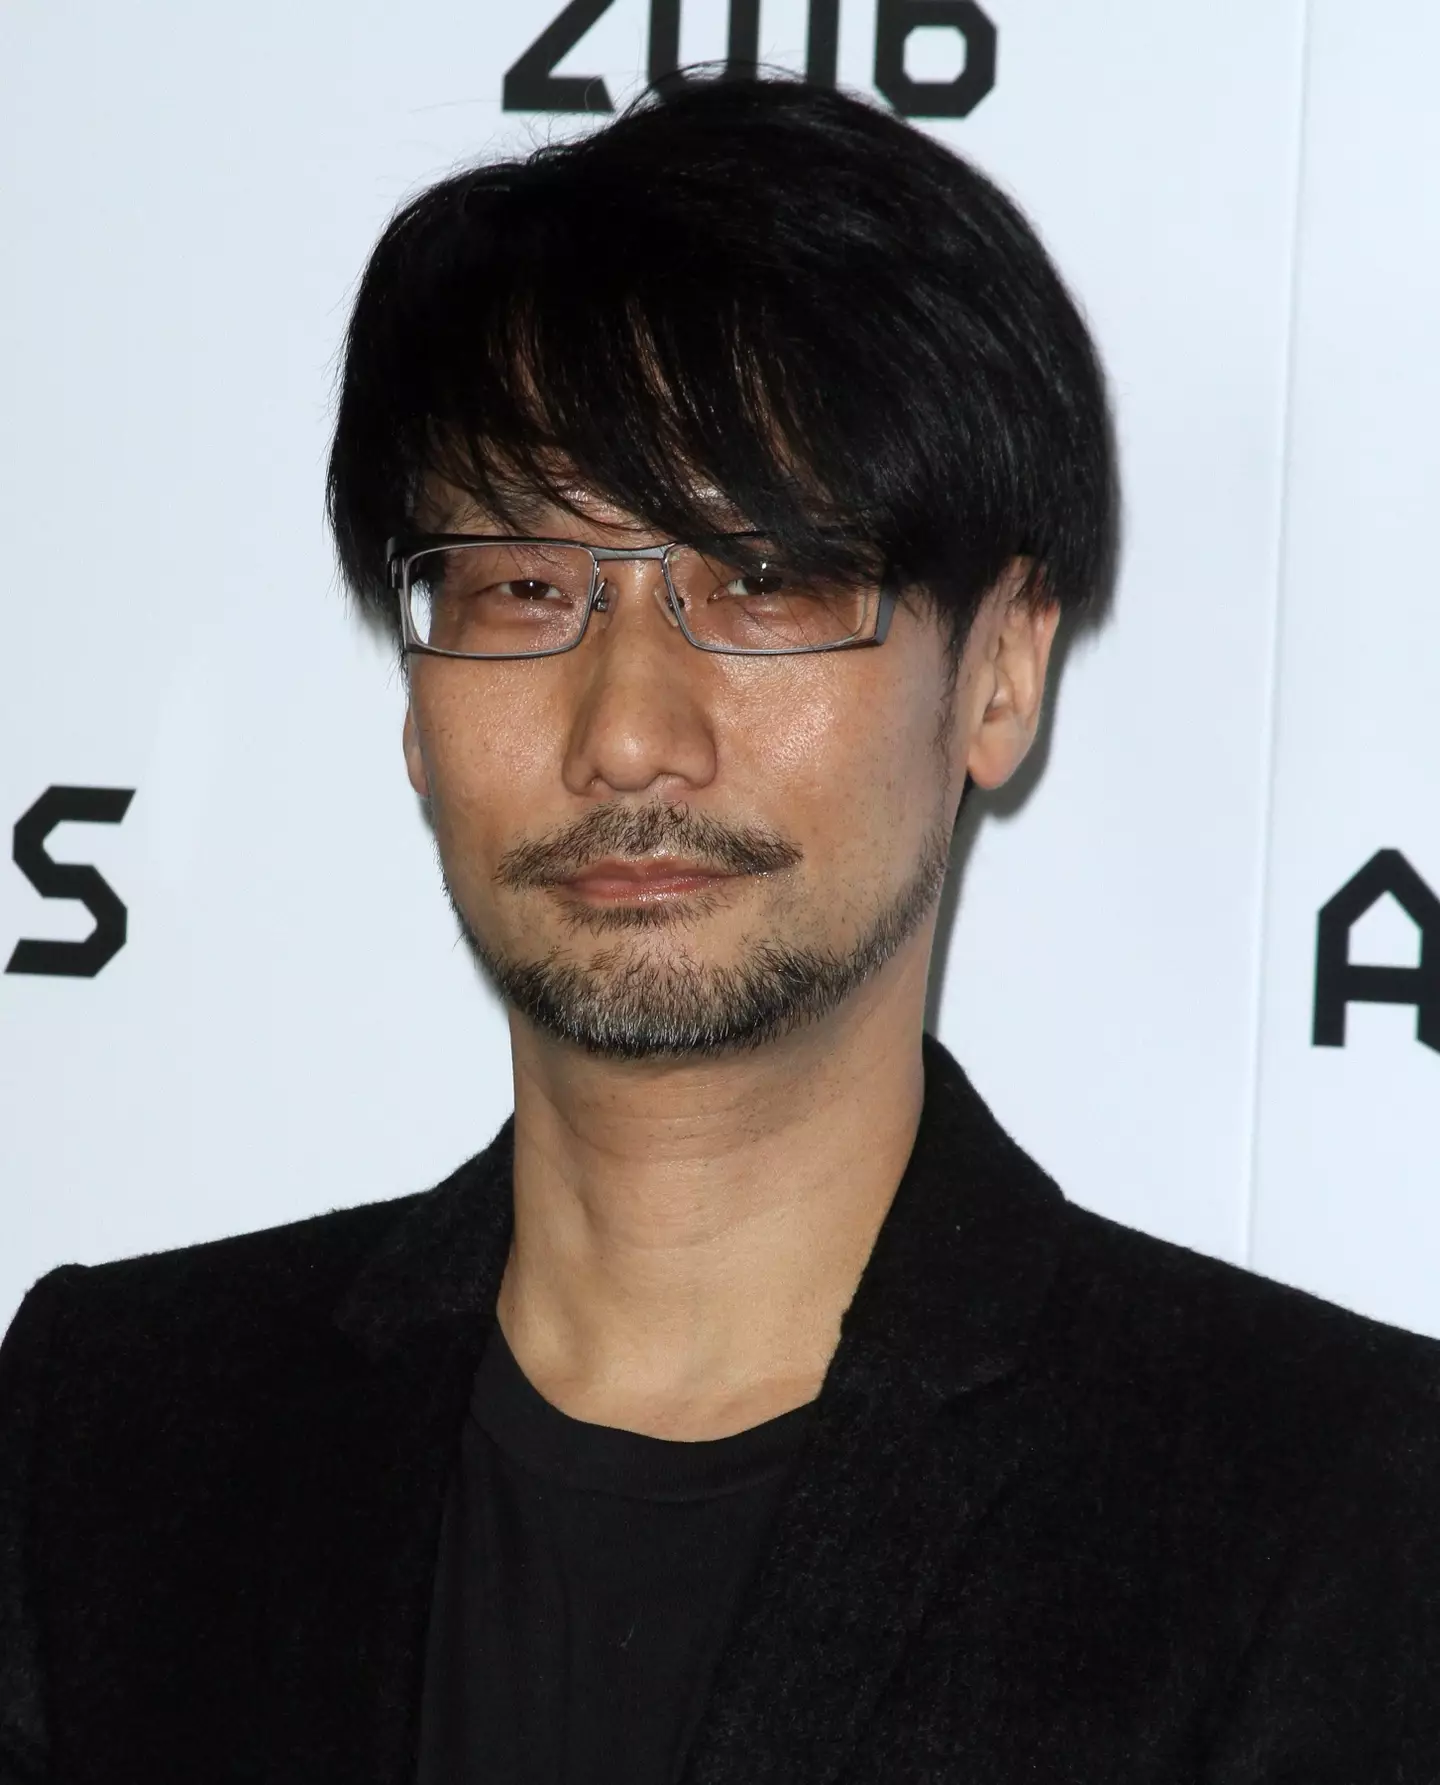 Hideo Kojima was falsely linked with the assassination of Shinzo Abe.